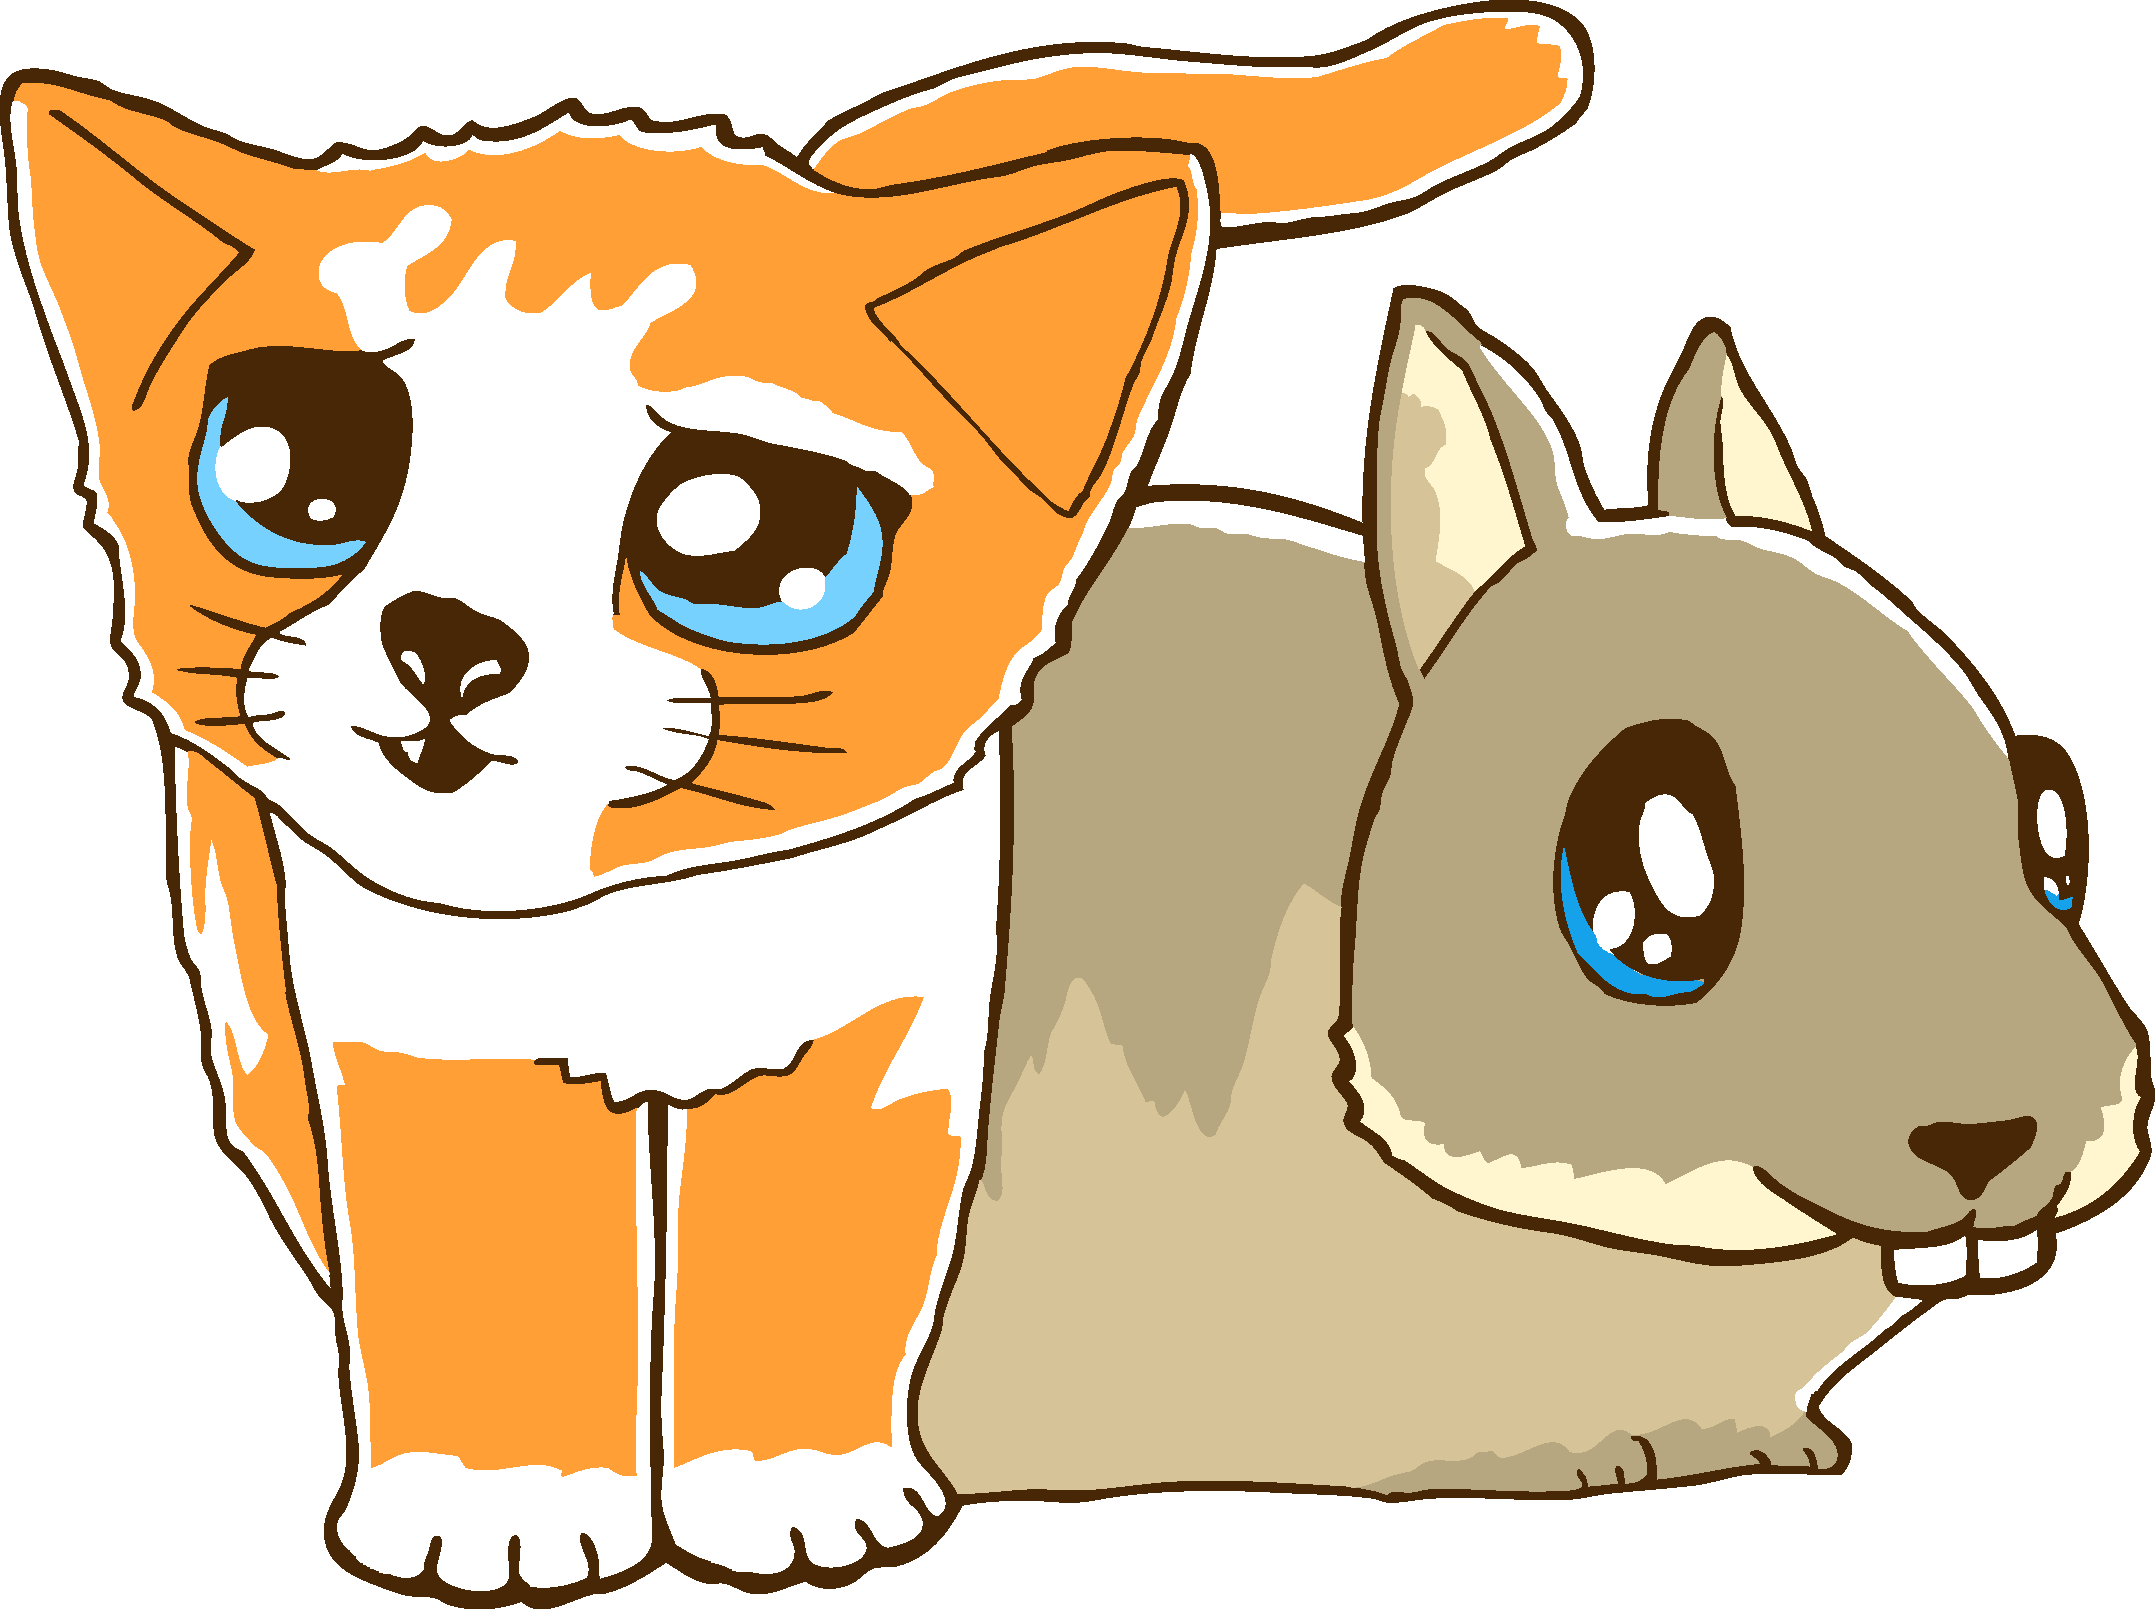 This is a cartoon of a cat and a bunny.